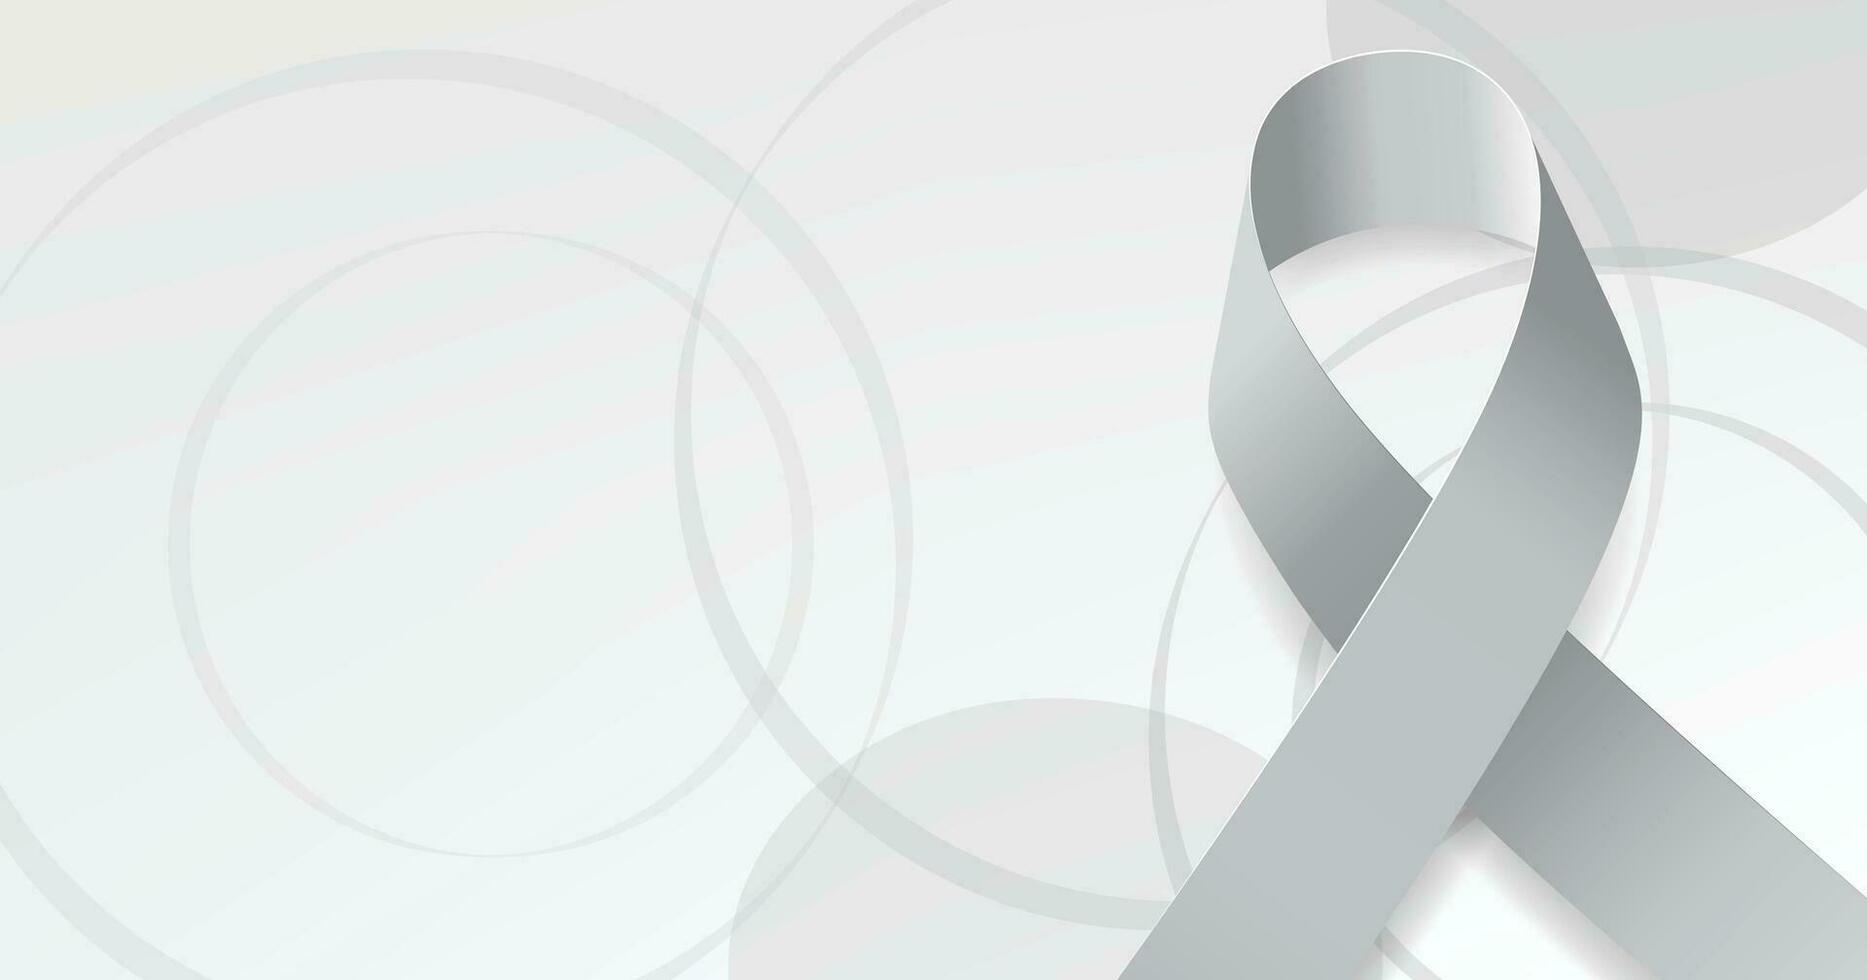 American diabetes awareness month concept. Banner template with grey ribbon and text.  Vector illustration.